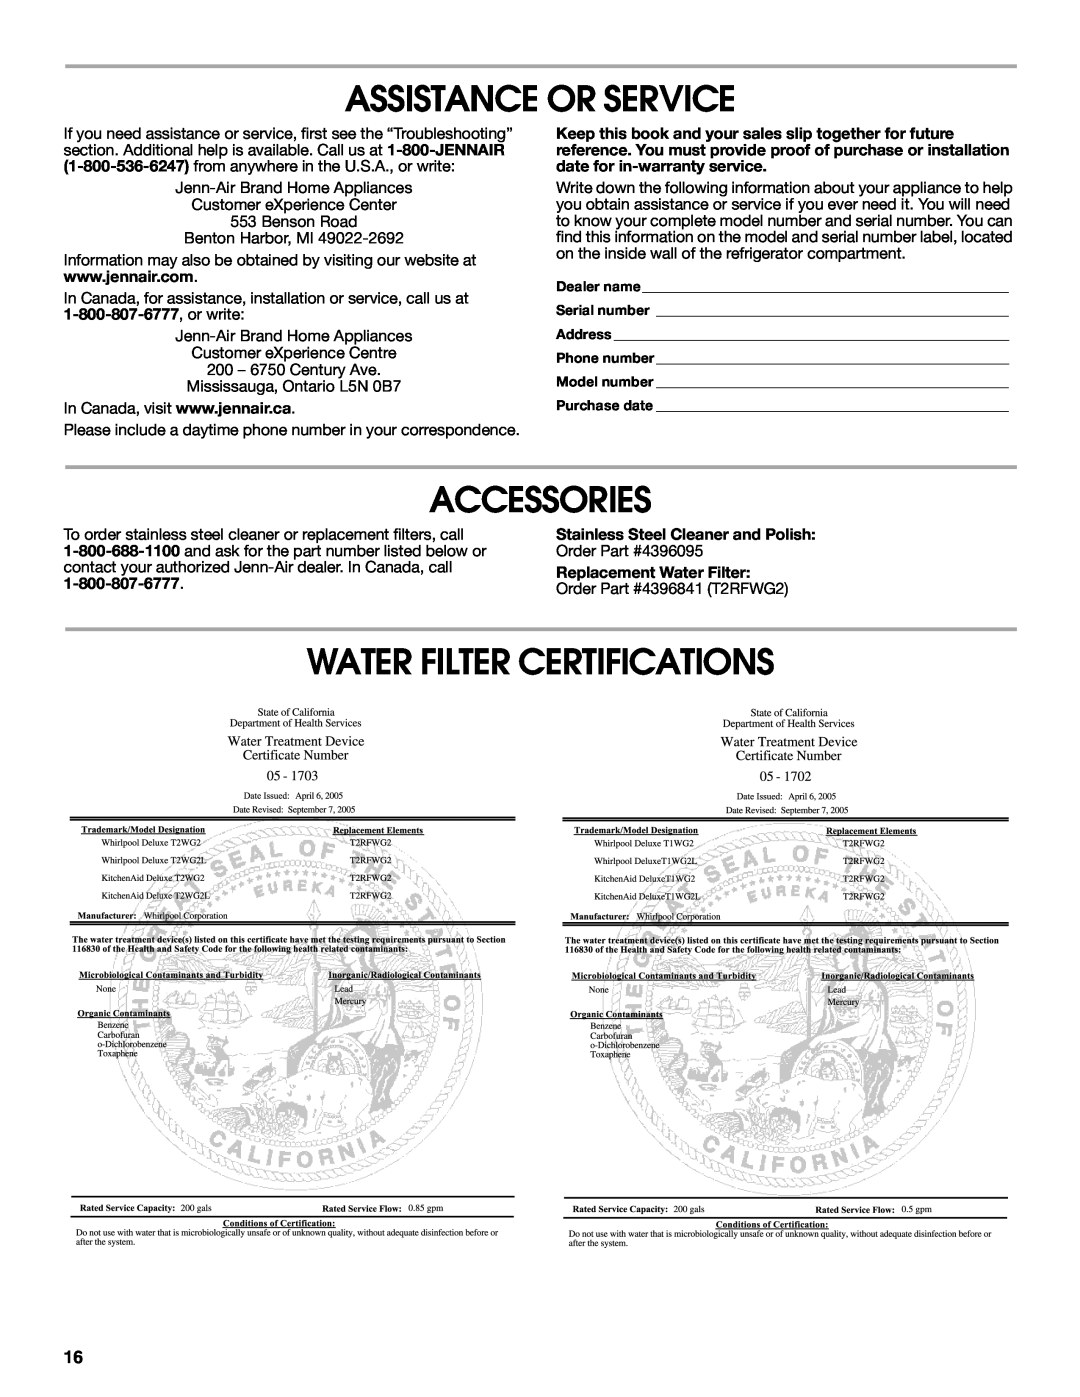 Jenn-Air W10303988A Assistance Or Service, Accessories, Water Filter Certifications, Stainless Steel Cleaner and Polish 